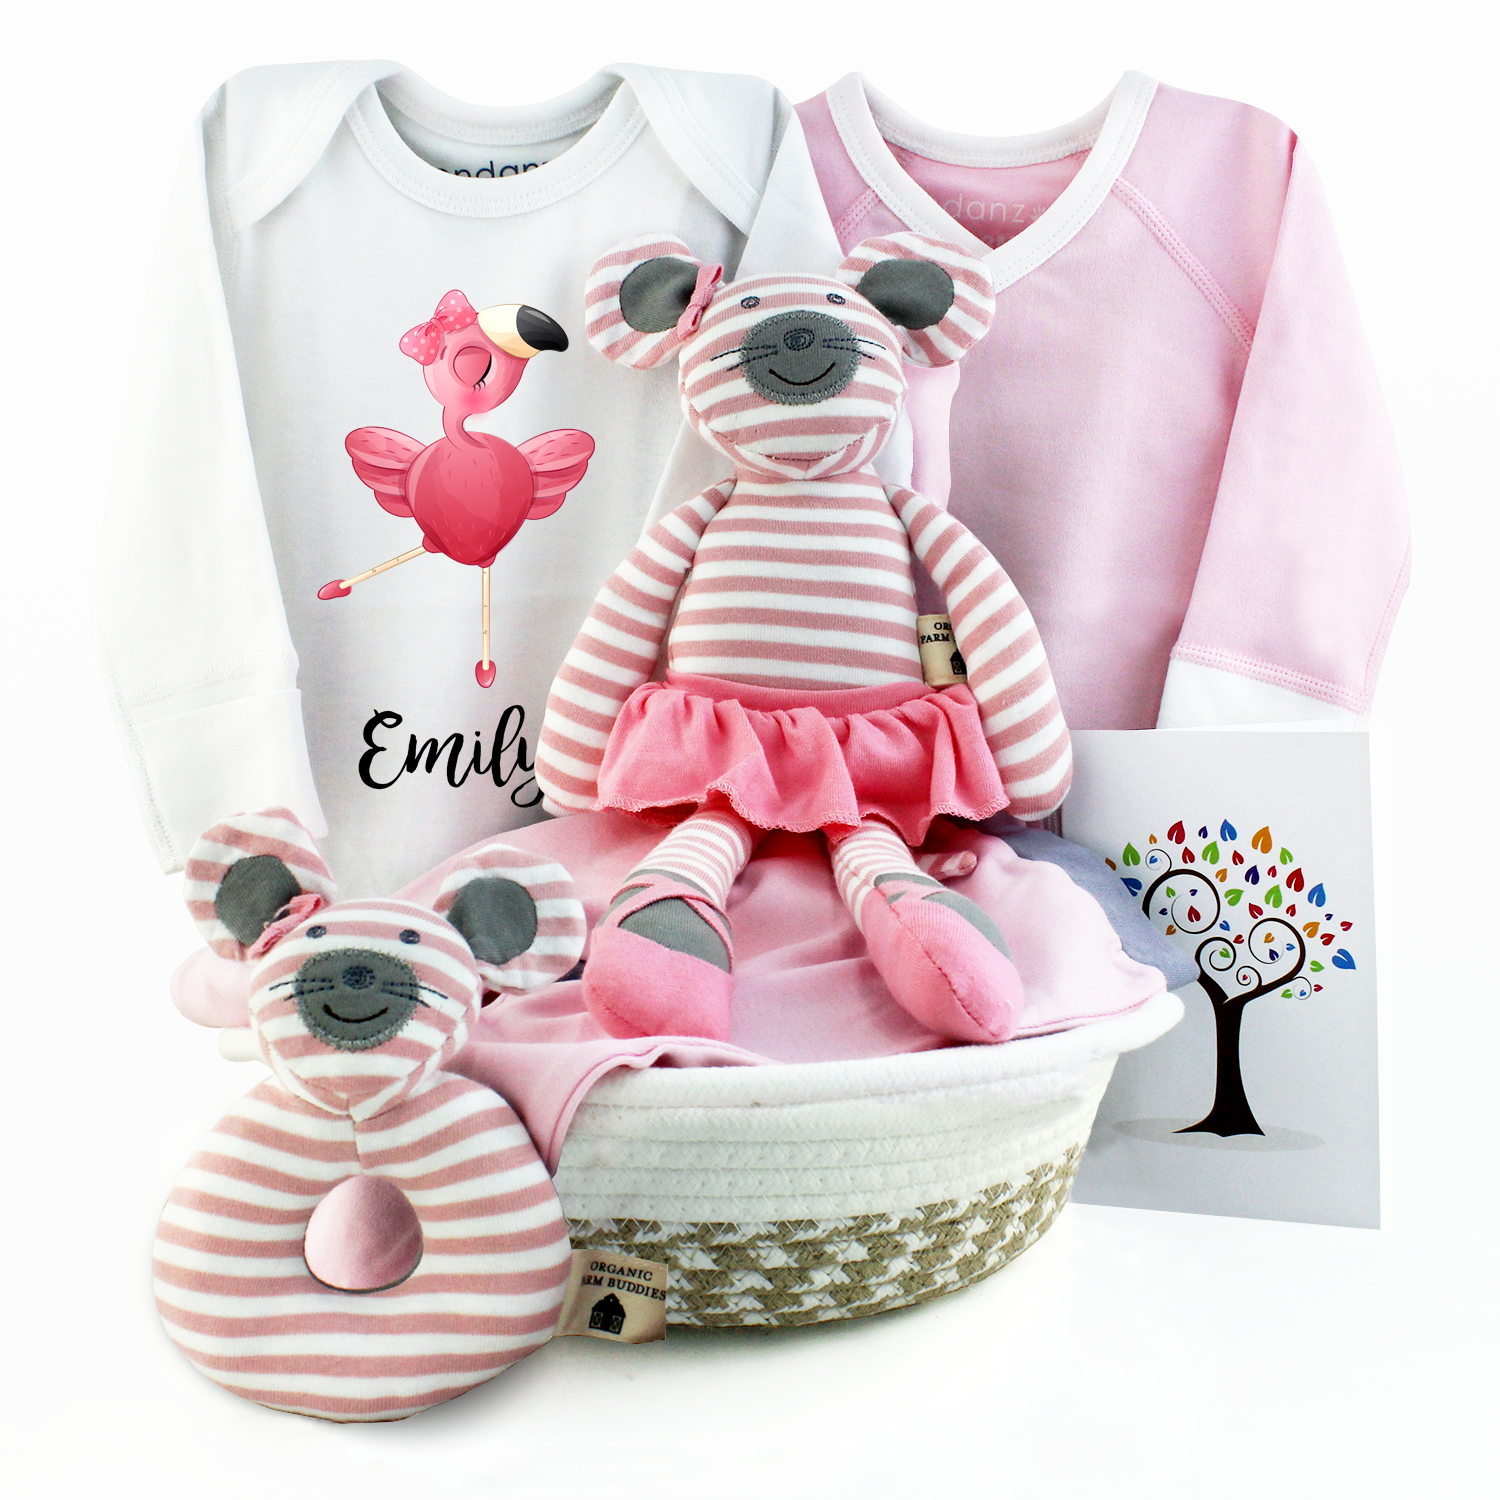 Kids At The Patio - Baby Girl Gift Basket - Ginger Birds